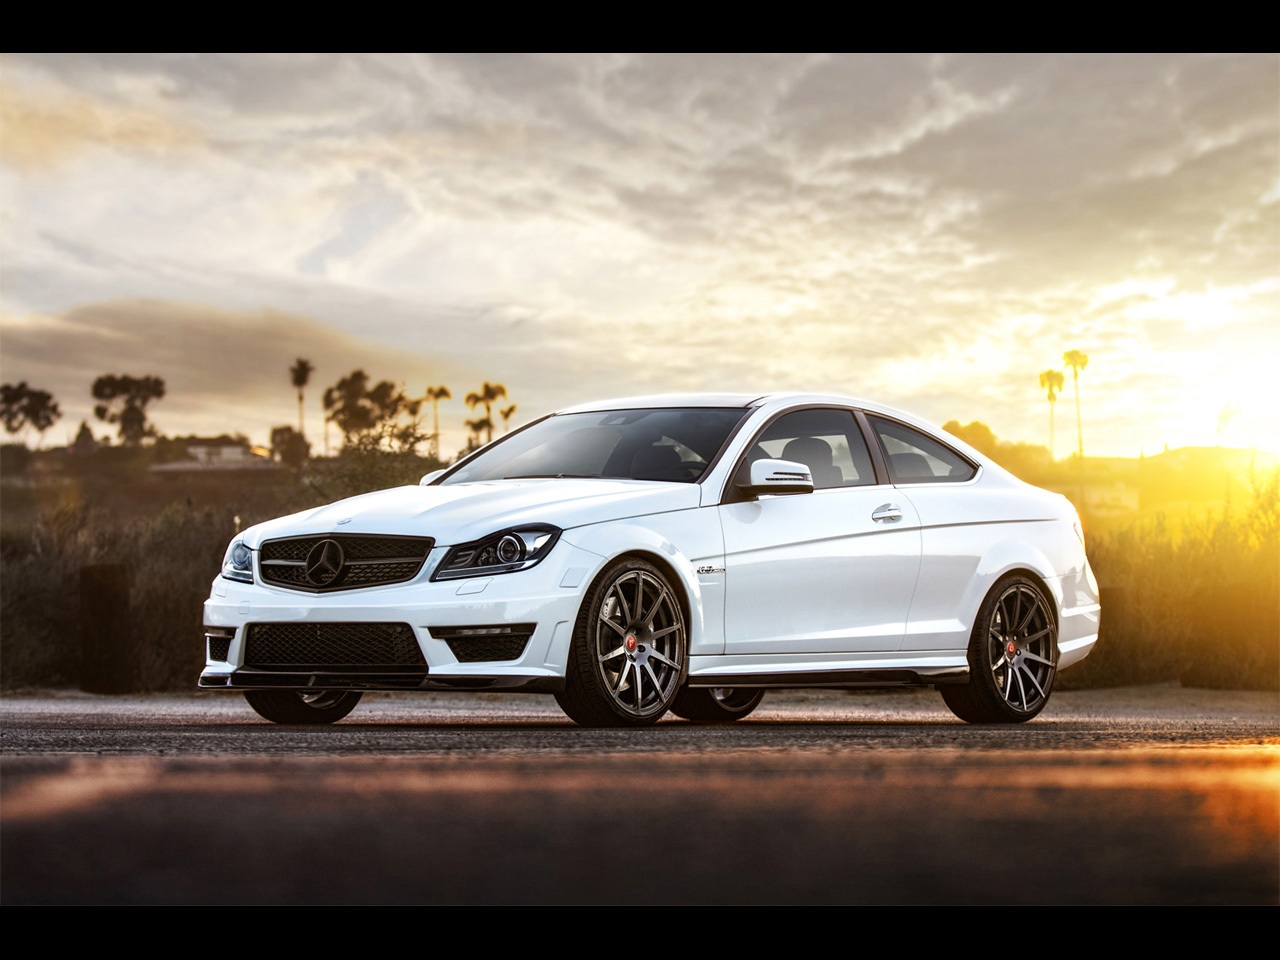 Mercedes Benz C63 Amg Front Angle Static Wallpaper